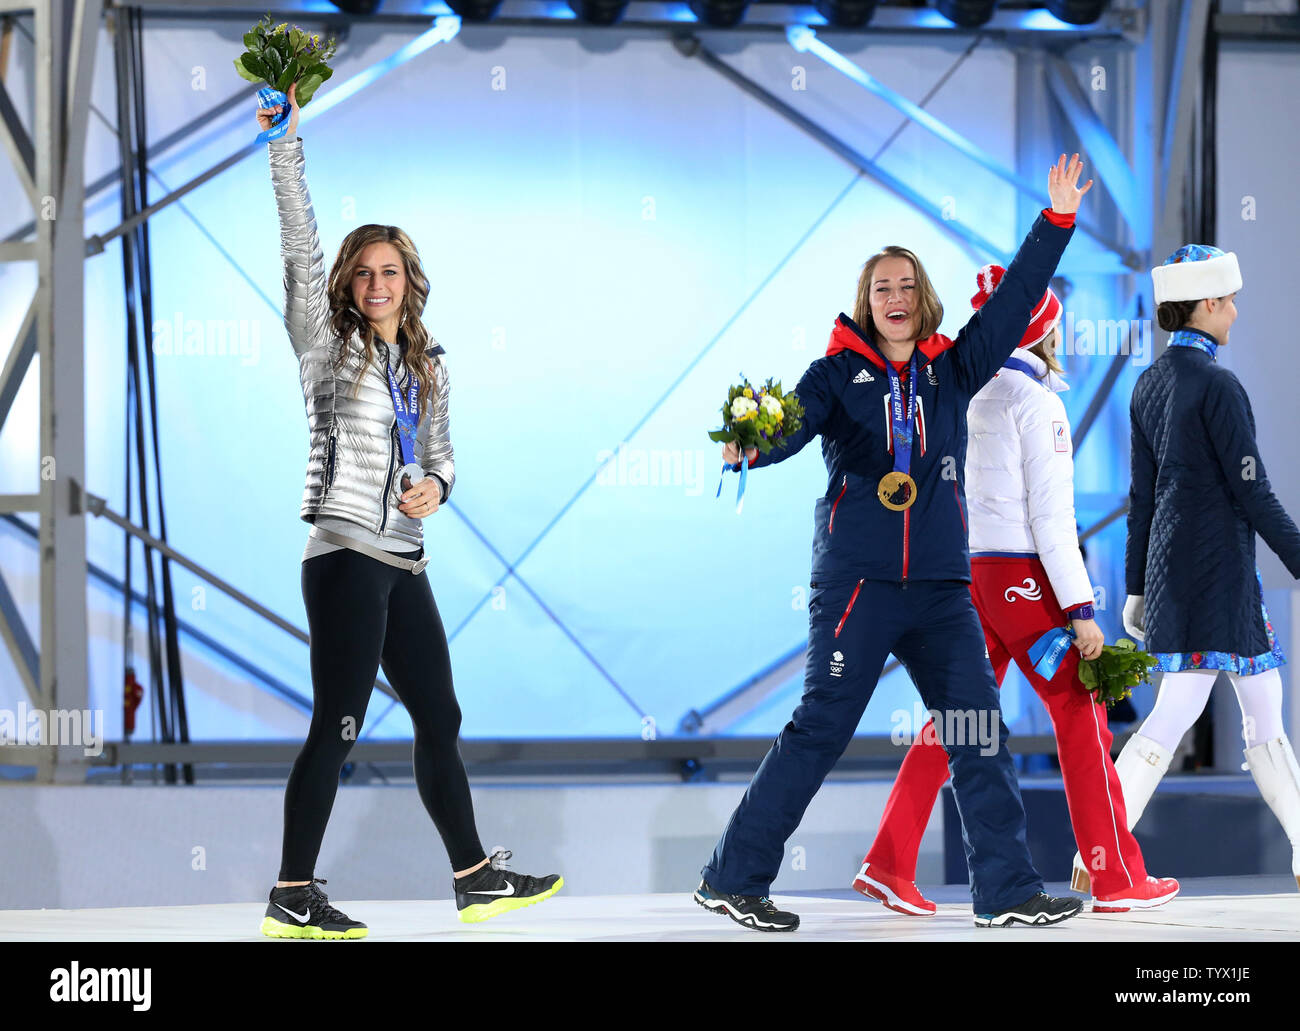 (From L to R) US athlete silver medalist Noelle Pikus-Pace and Great Britain's gold medalist Elizabeth Yarnold jubilate as they leave at the end of the medal ceremony for the women skeleton during the Sochi Winter Olympics on February 15, 2014.  UPI/Maya Vidon-White Stock Photo